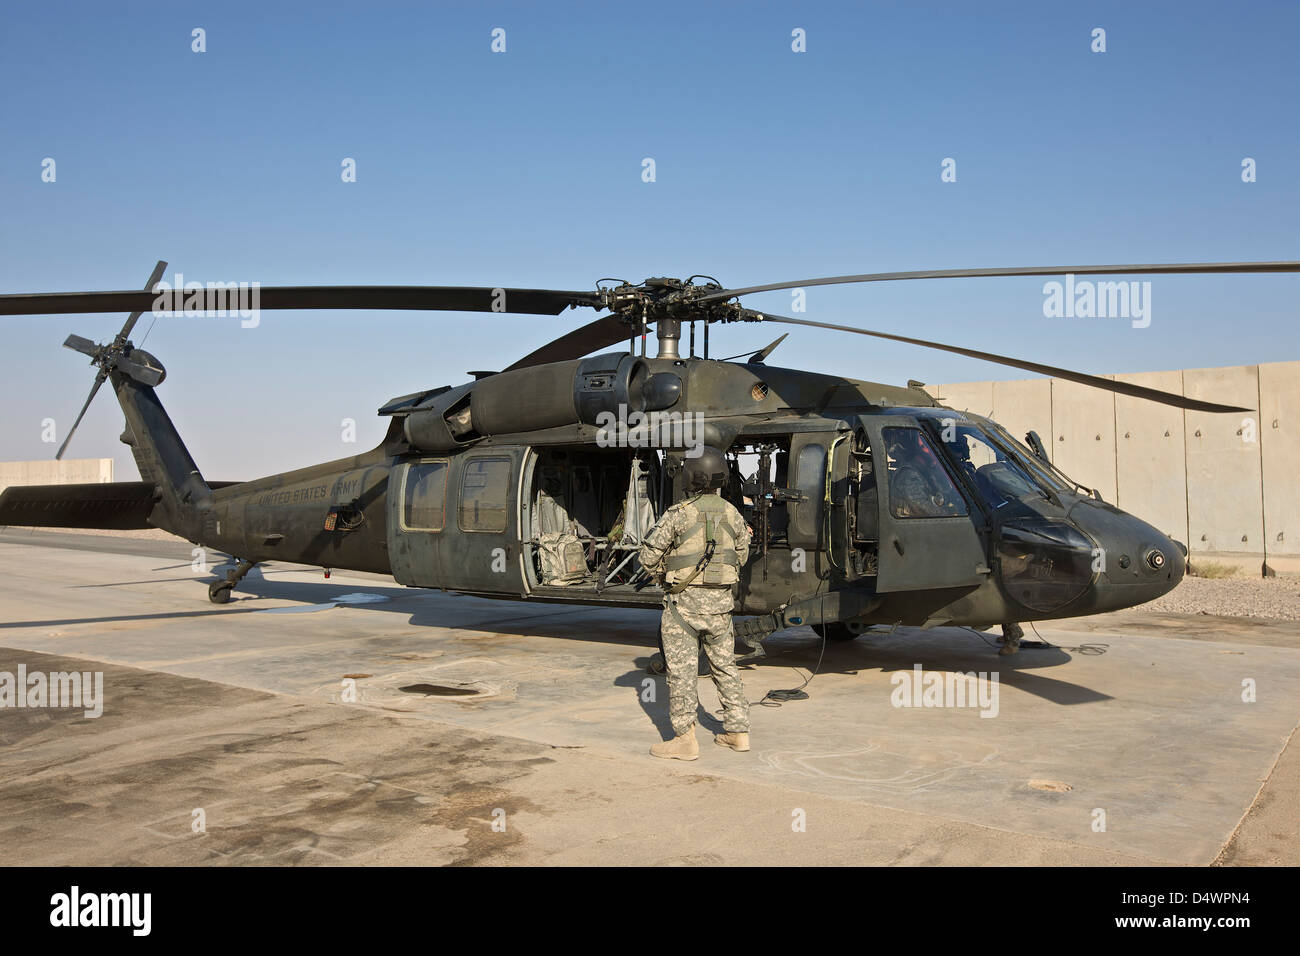 A U.S. Army crew chief stands by while pilots go through their pre-start checks on a UH-60 Black Hawk, Tikrit, Iraq. Stock Photo